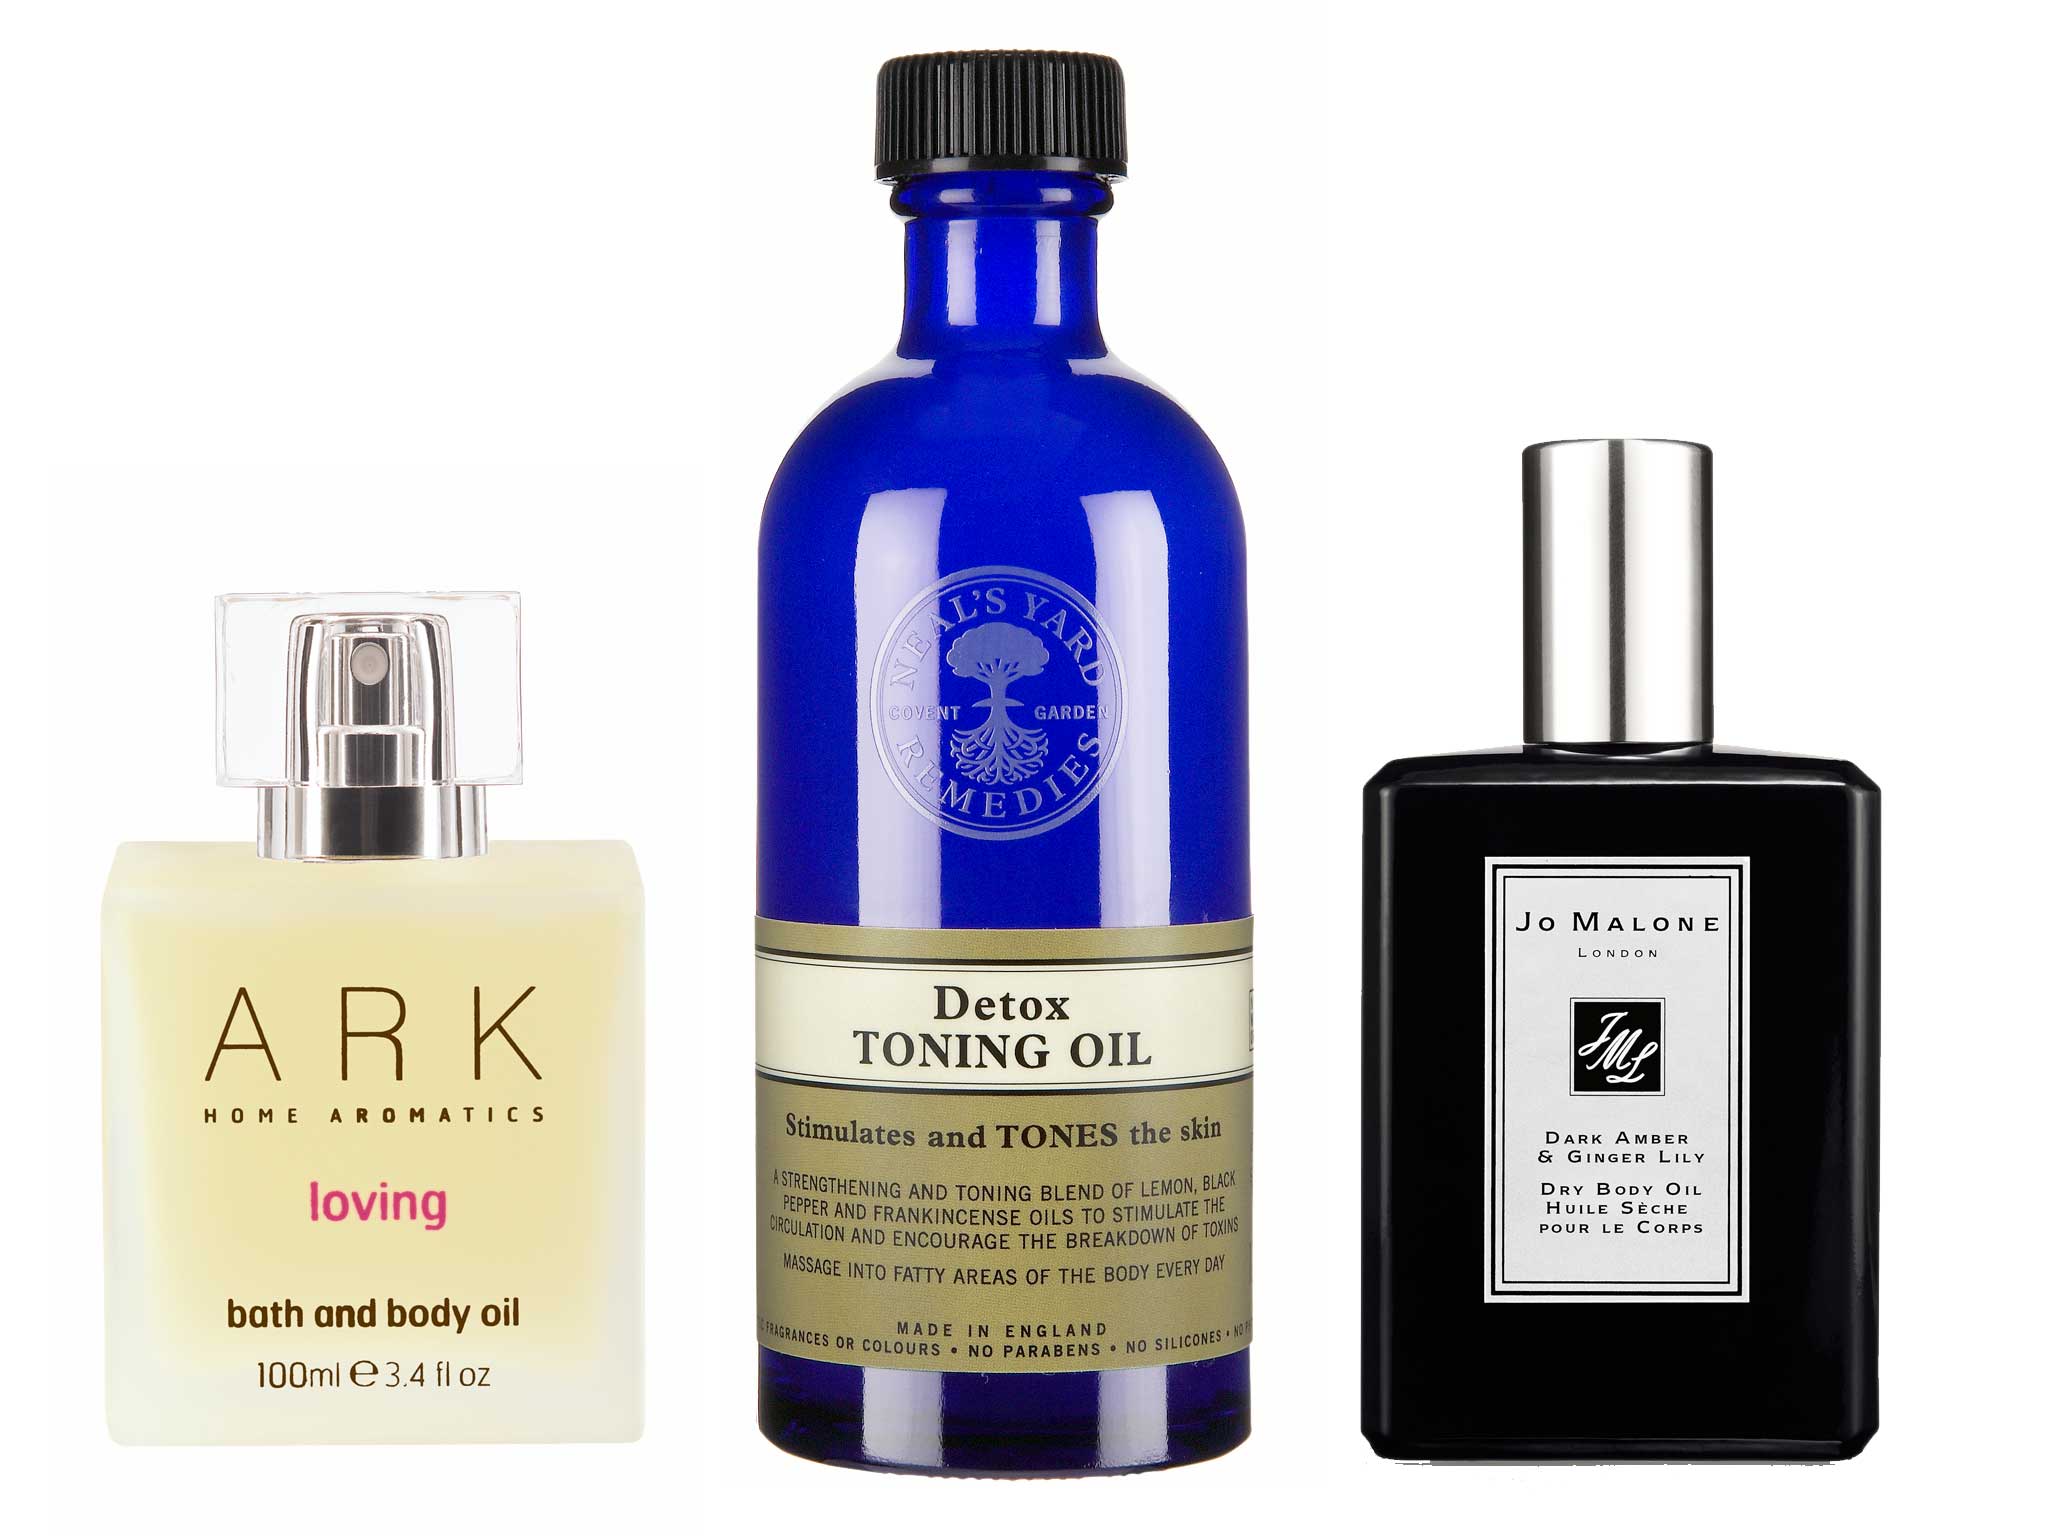 Skin treat: 13 Best Body Oils | The Independent | The Independent